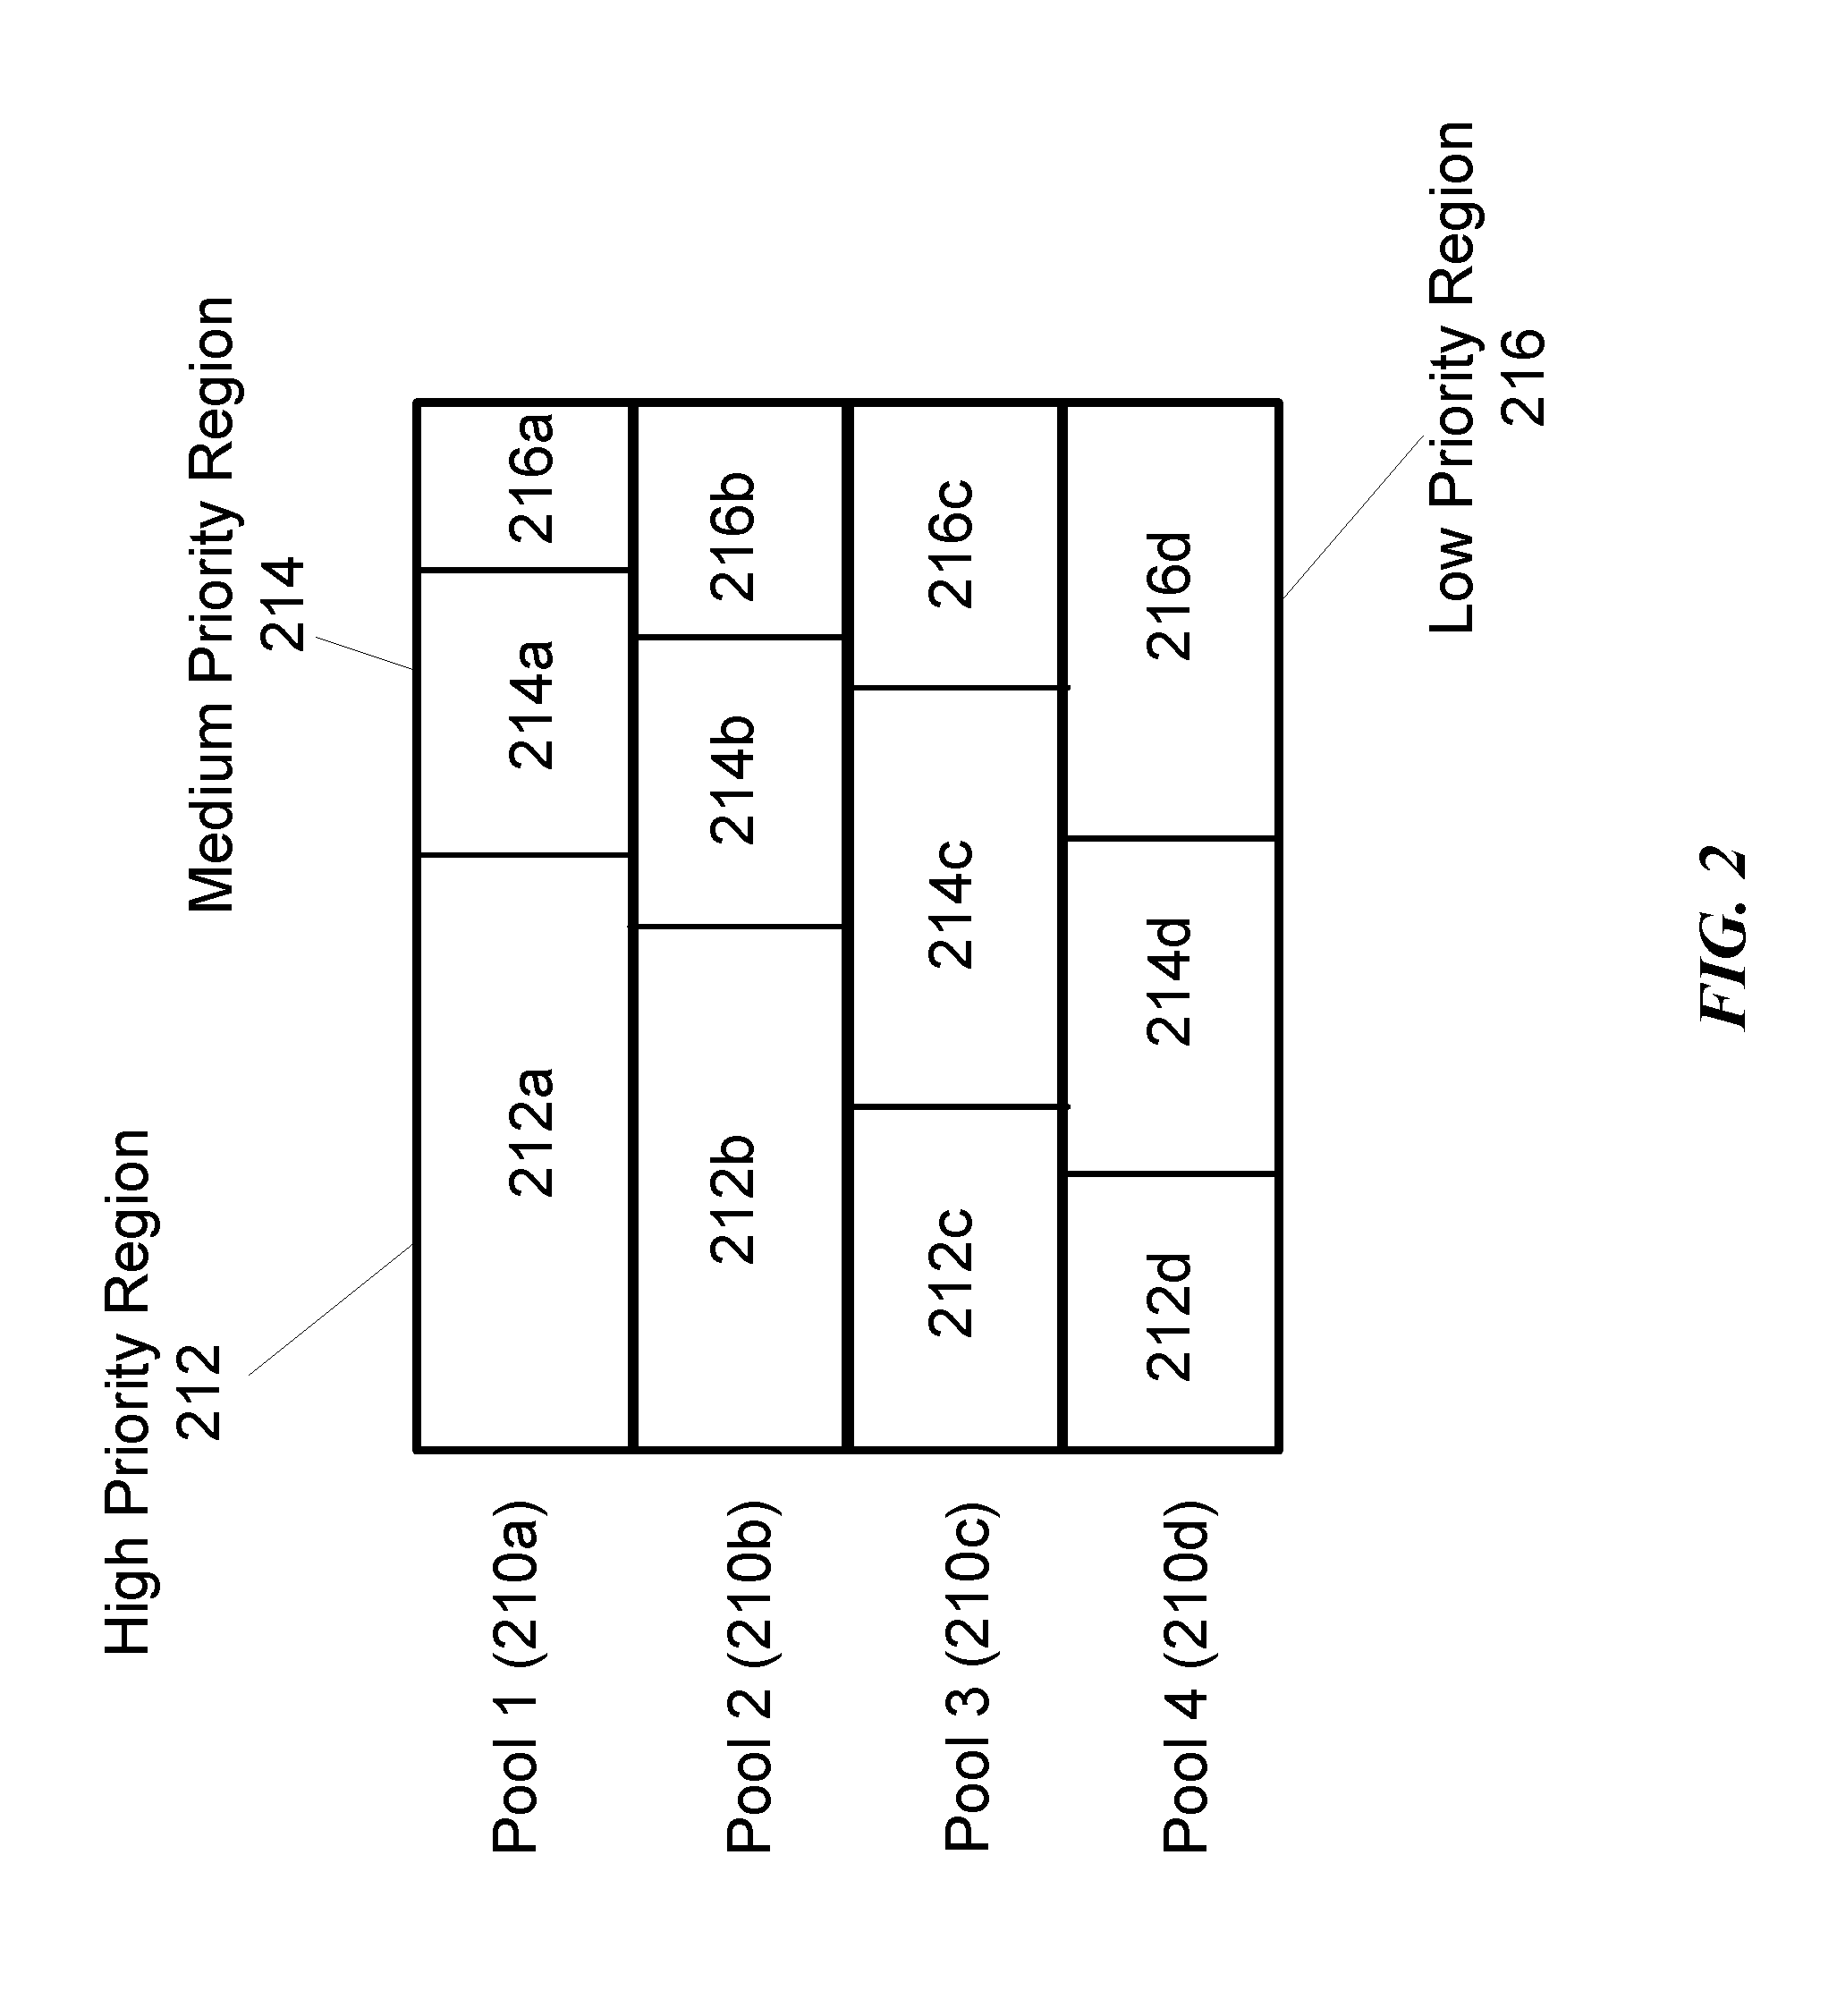 Device-to-device priority pool configuration